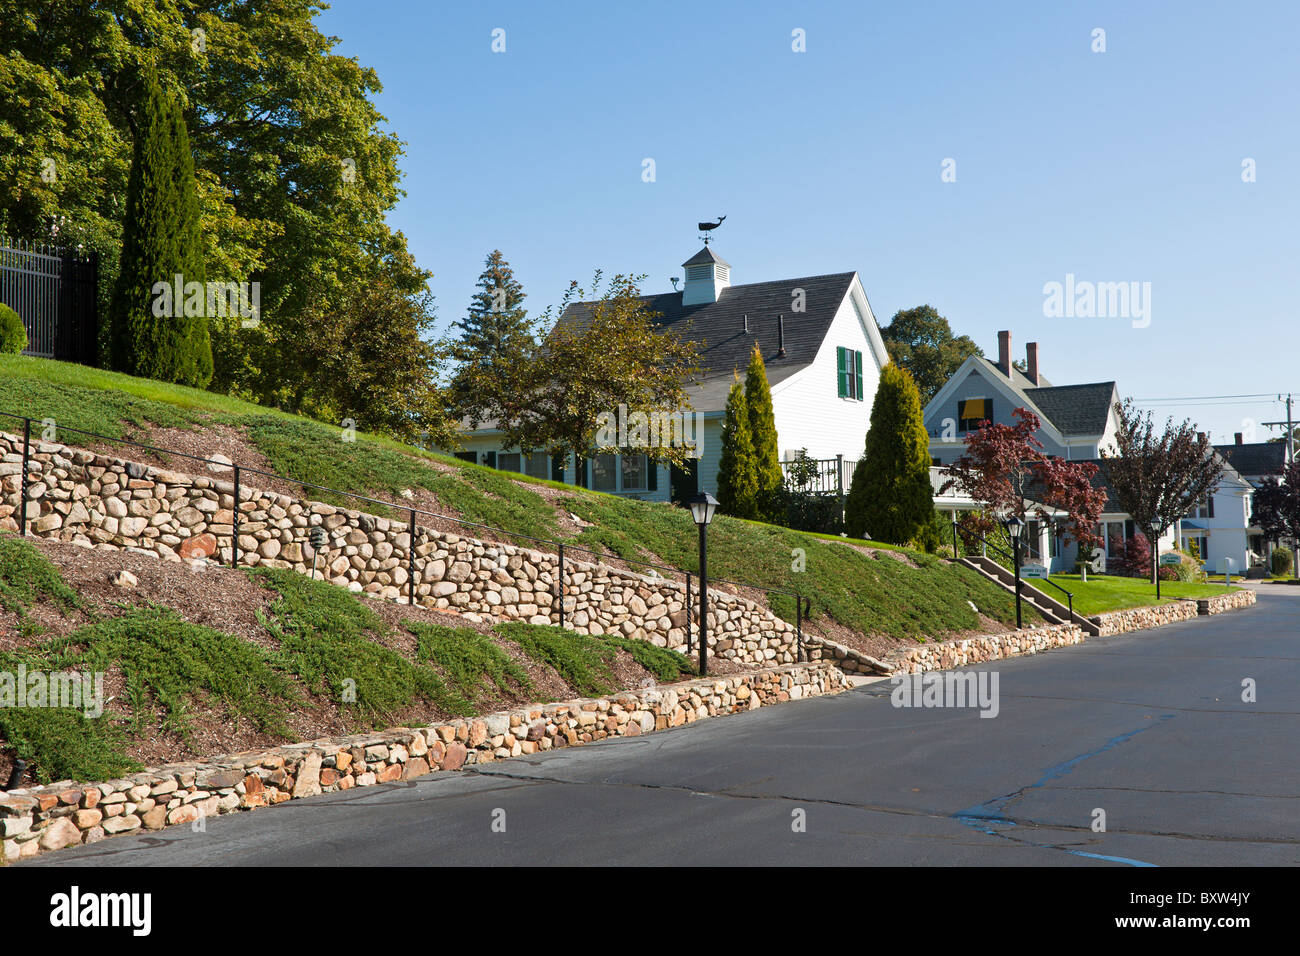 Whale shaped weather vane on roof of house behind stone lined walkway in Plymouth Massachusetts Stock Photo